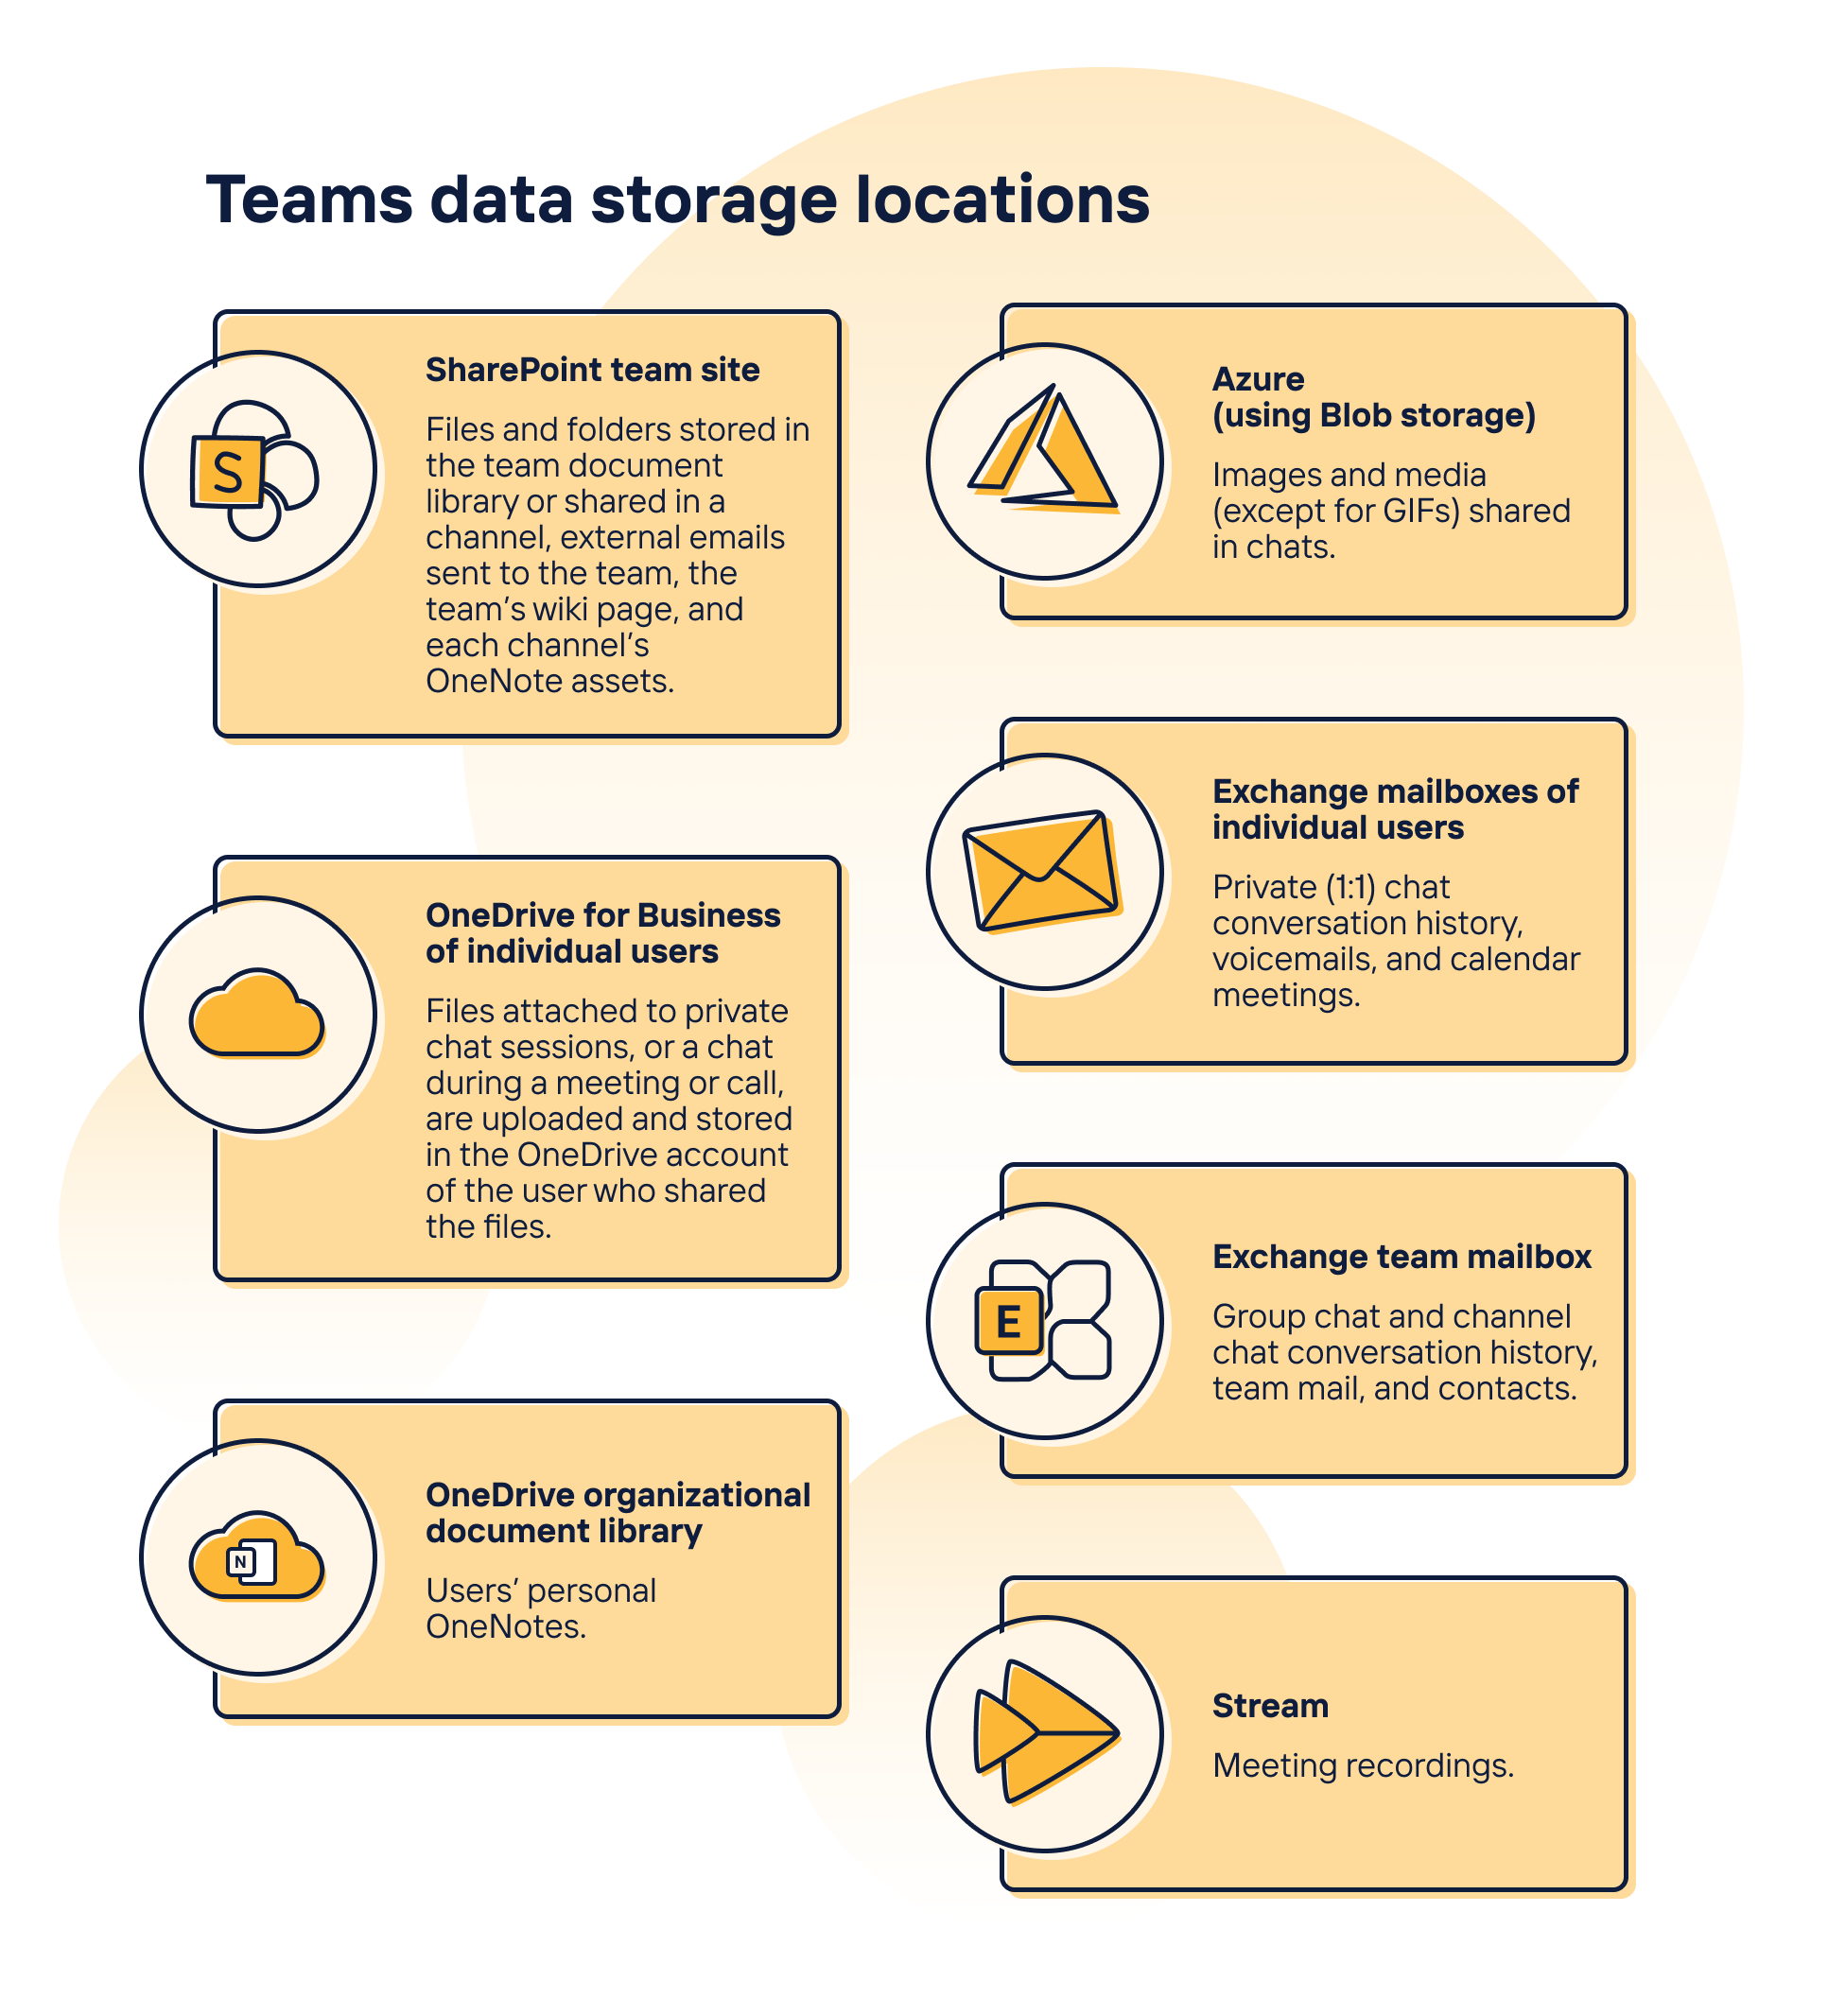 Where data is stored in Microsoft Teams